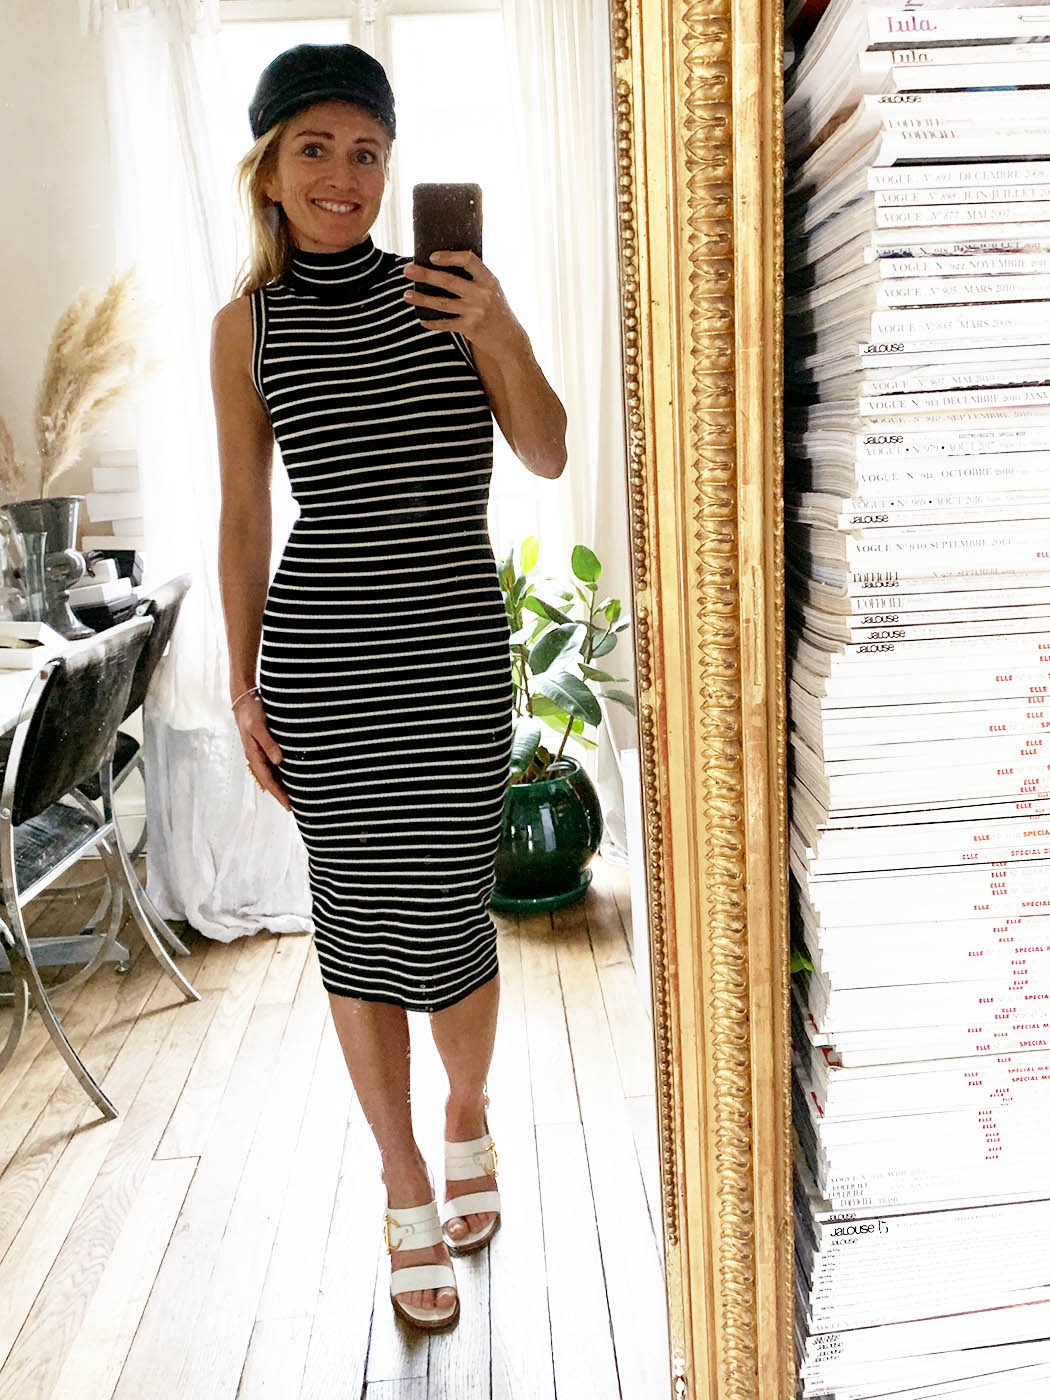 Boutique MICHAEL KORS Black and white striped ribbed sleeveless body con dress